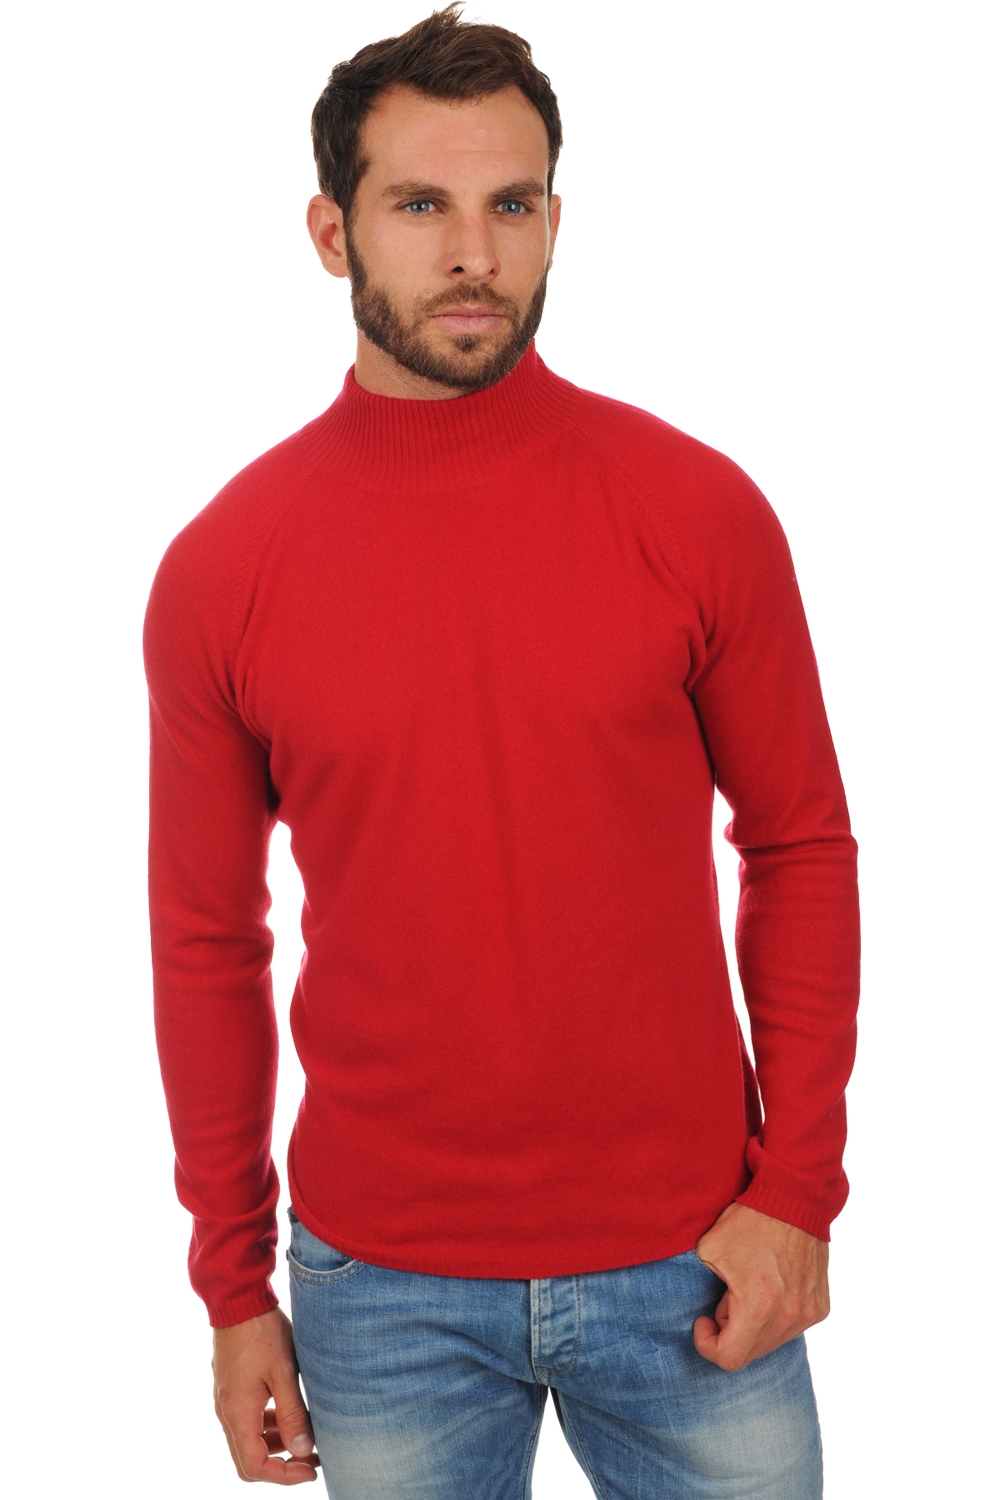 Cashmere men roll neck frederic blood red s